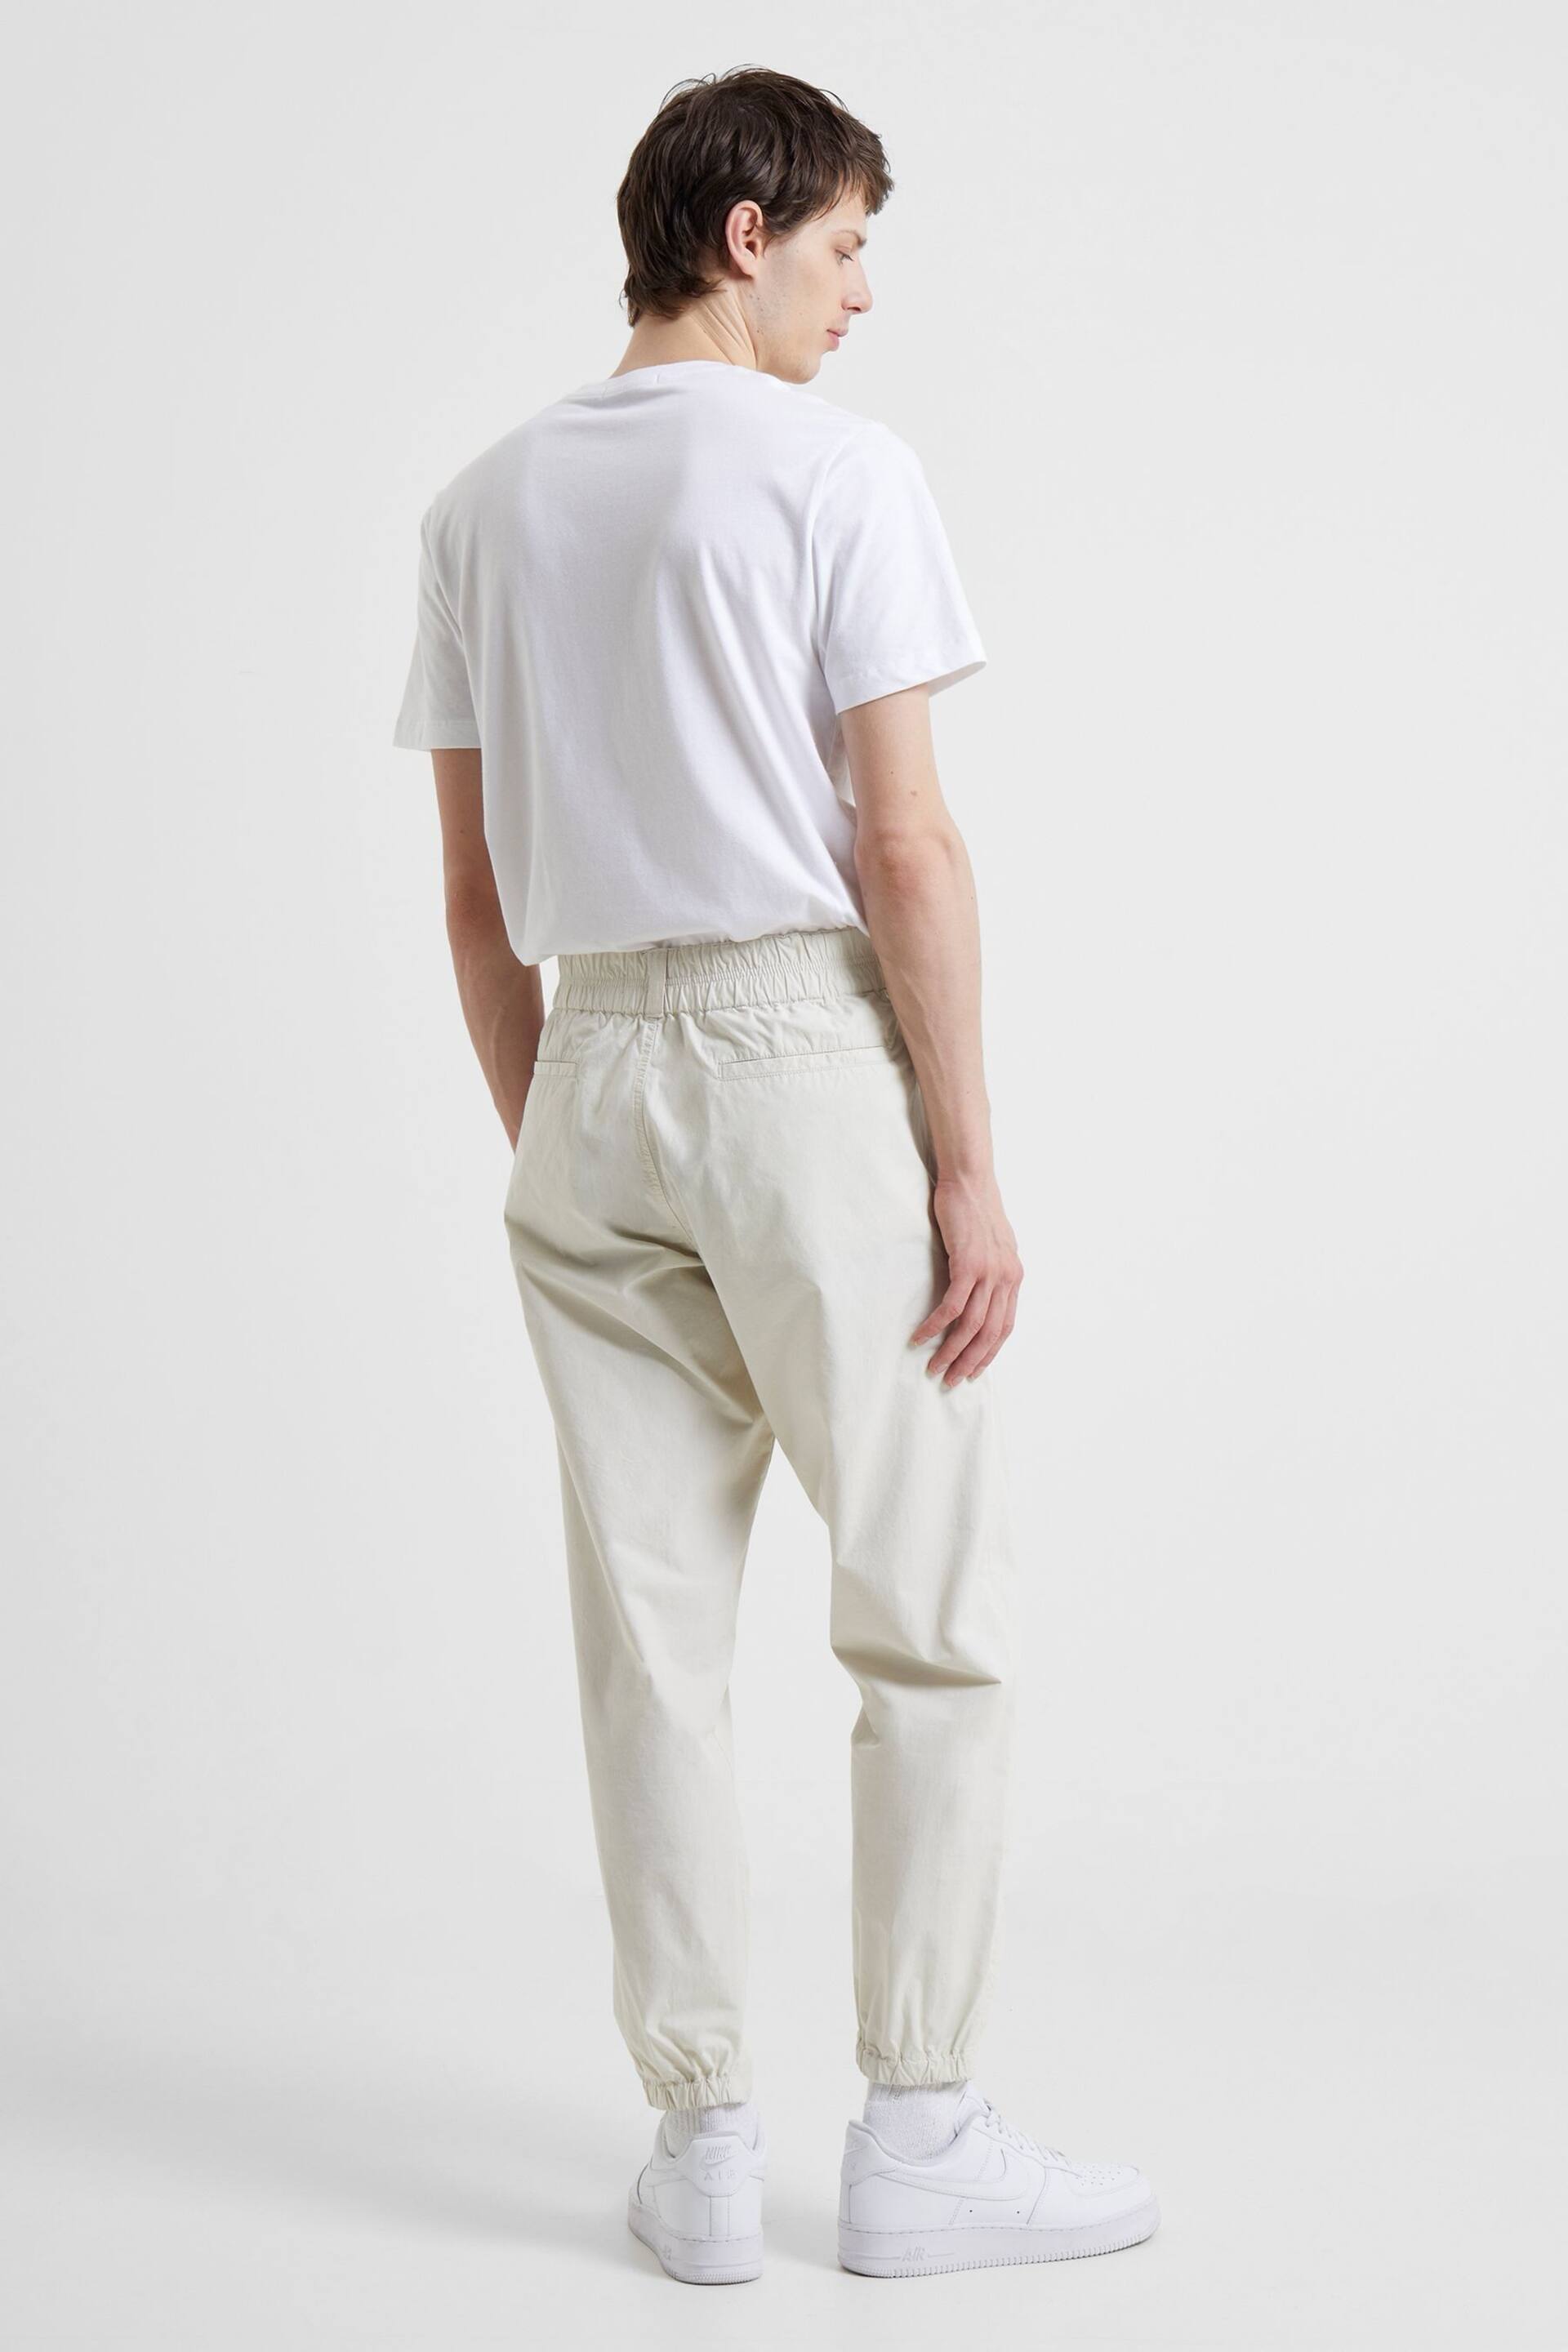 French Connection Military Cotton Tappered Chino Trousers - Image 2 of 4